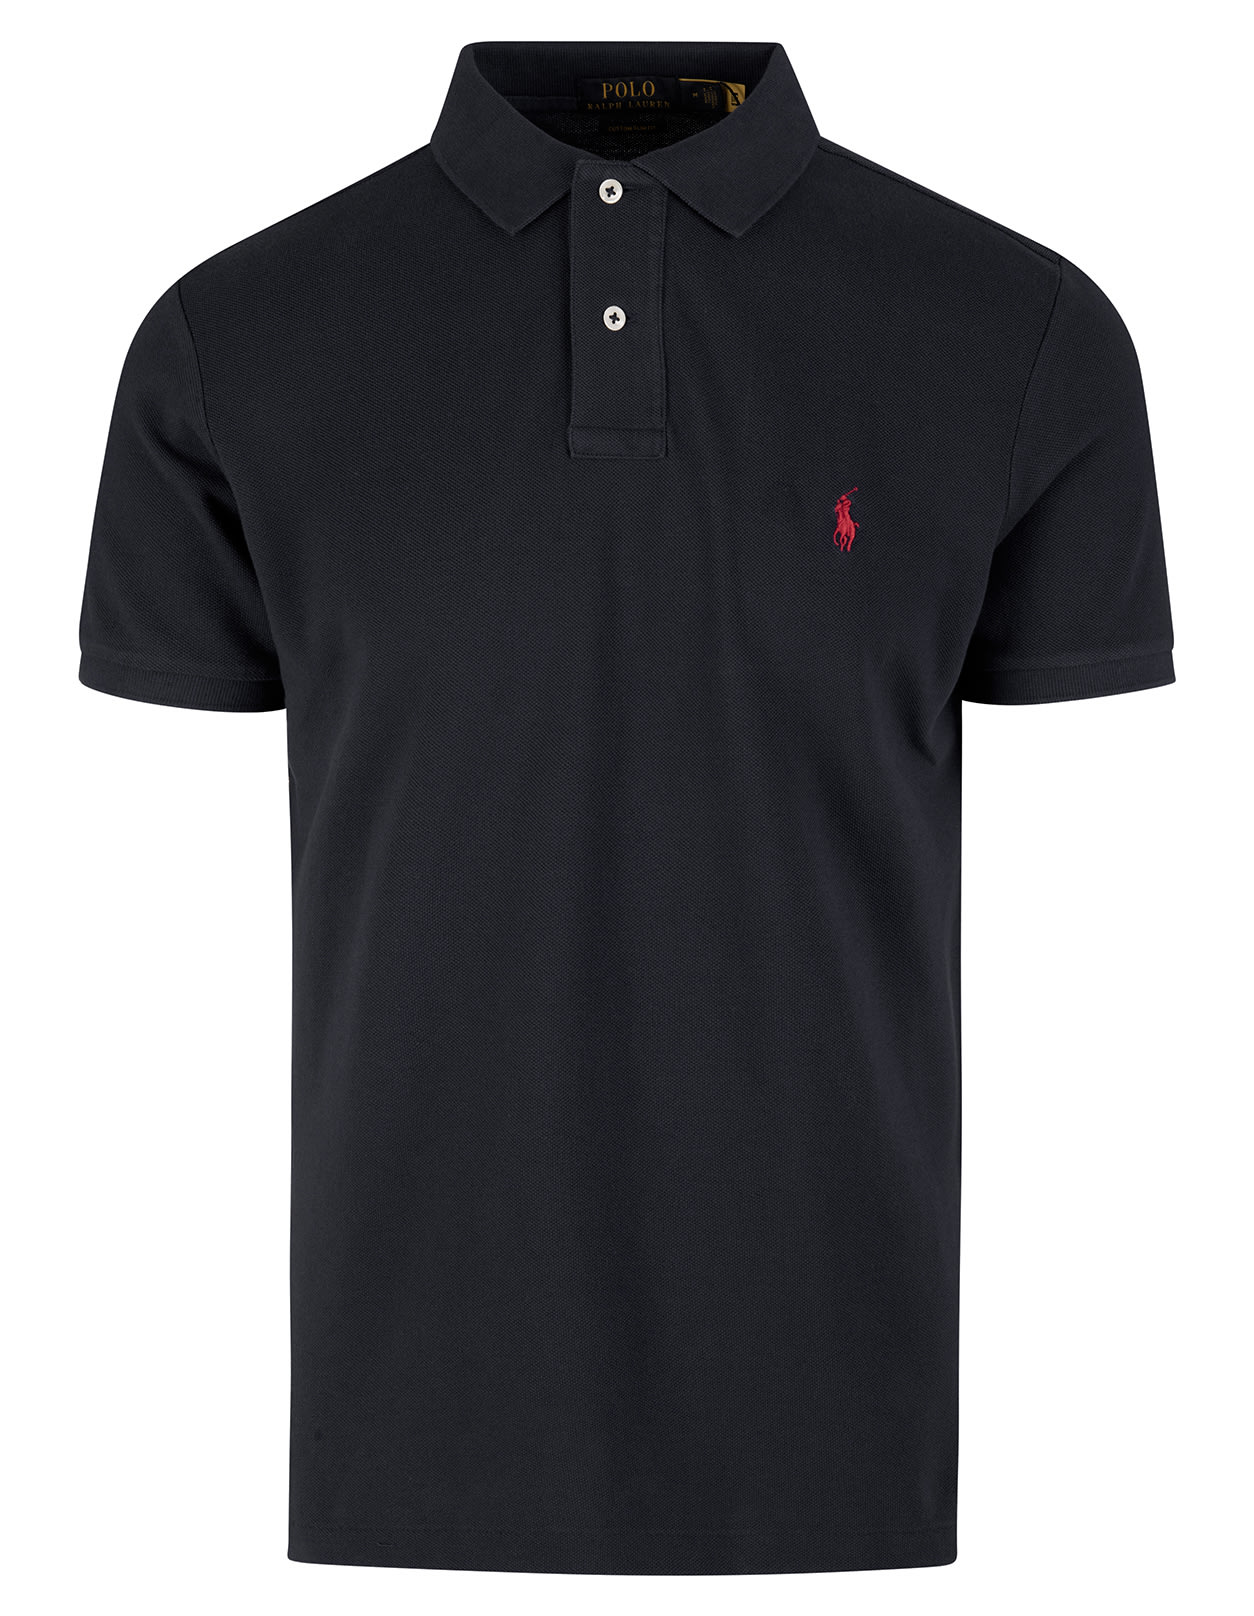 RALPH LAUREN MAN SLIM-FIT CUSTOM POLO SHIRT IN BLACK PIQUE WITH CONTRAST PONY